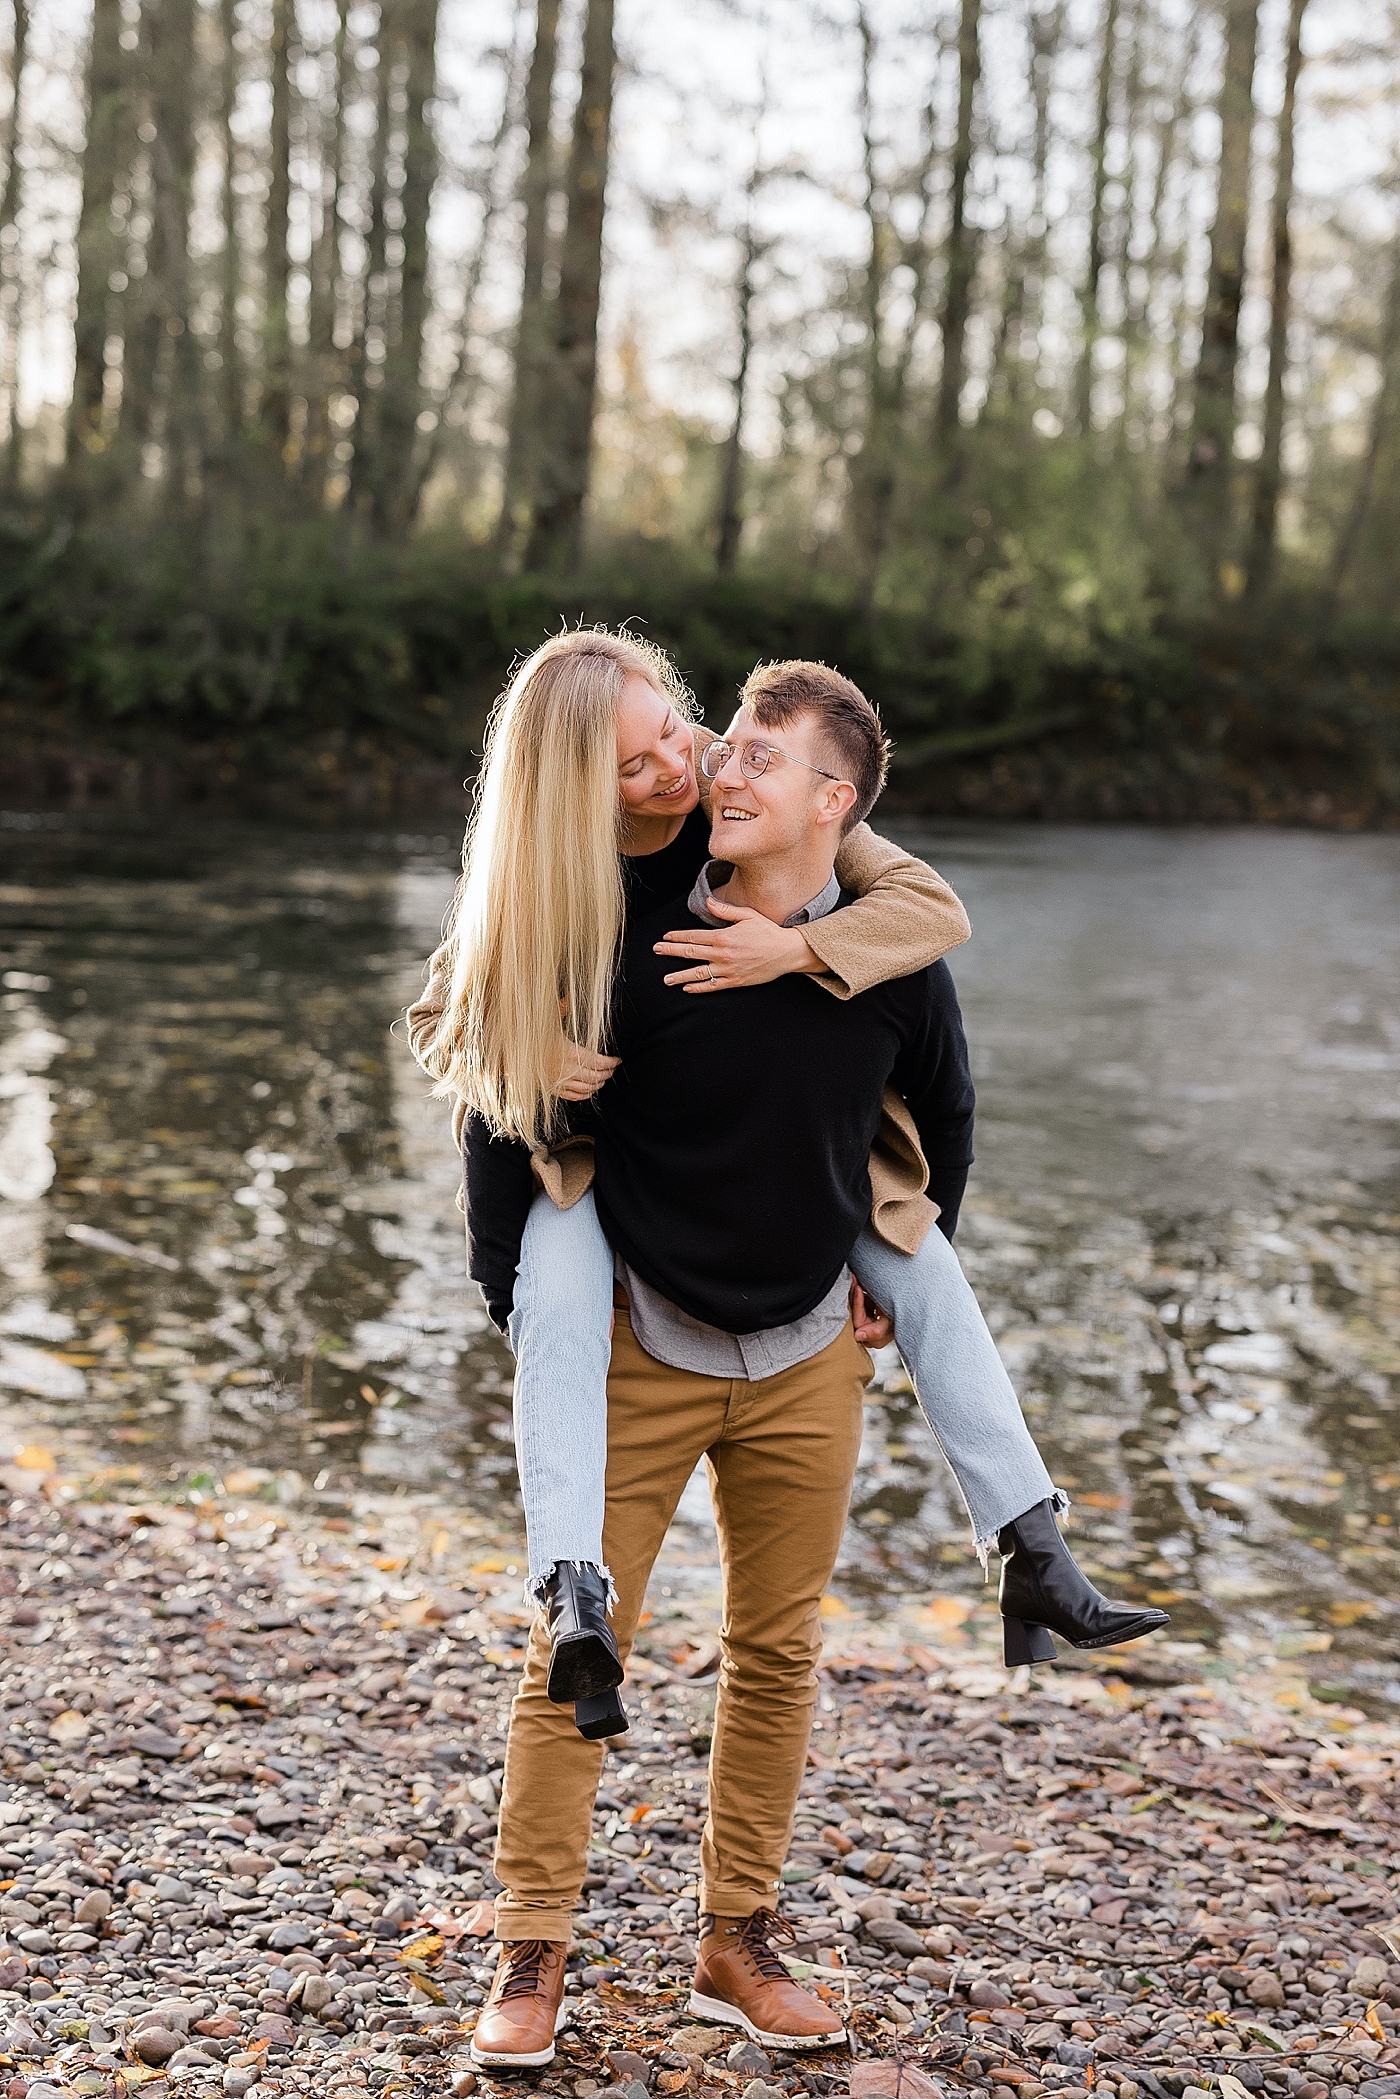 Fall engagement photos. Photo by Megan Montalvo Photography.